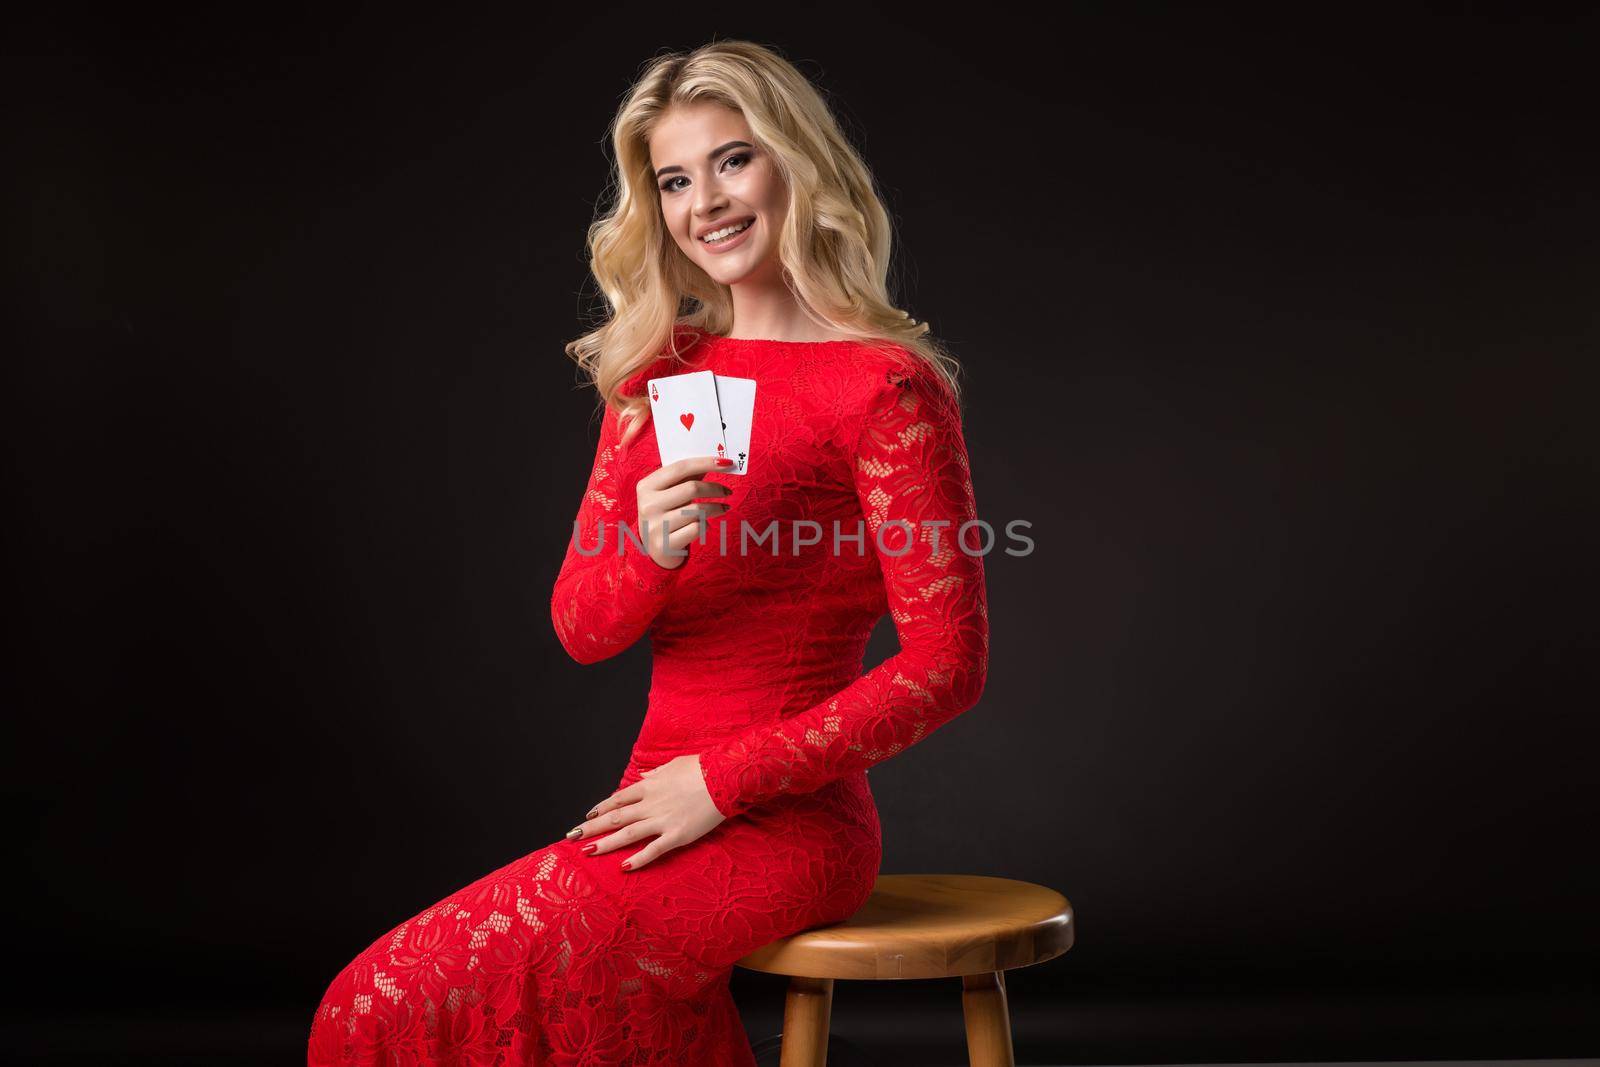 Young woman in red dress in casino with cards over black background. Poker